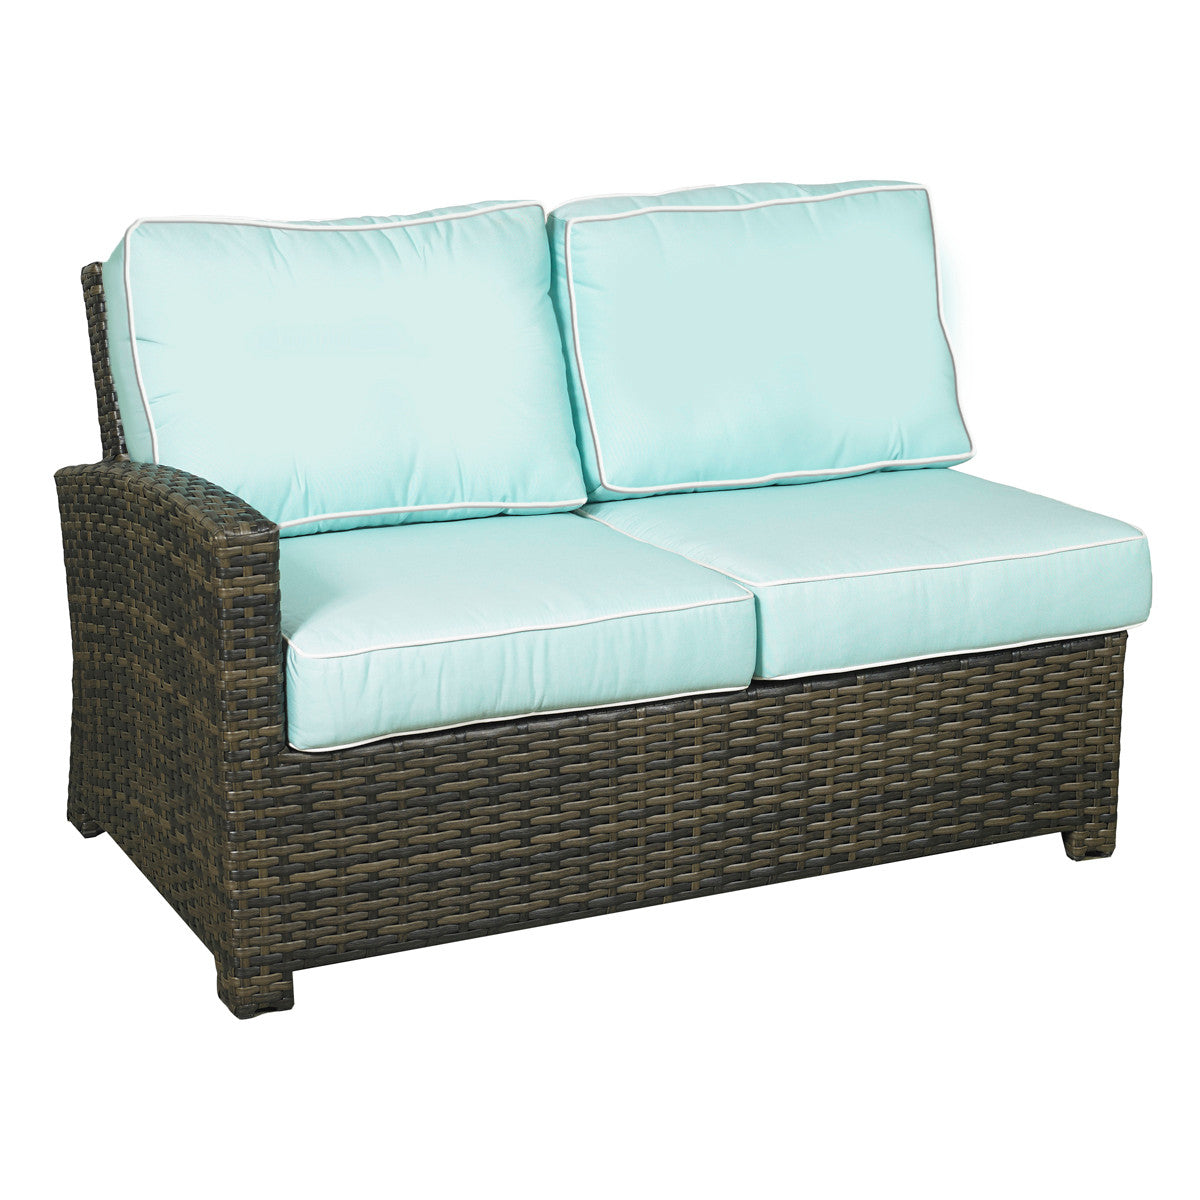 Forever Patio Brookside Wicker 5 Piece Sectional Set